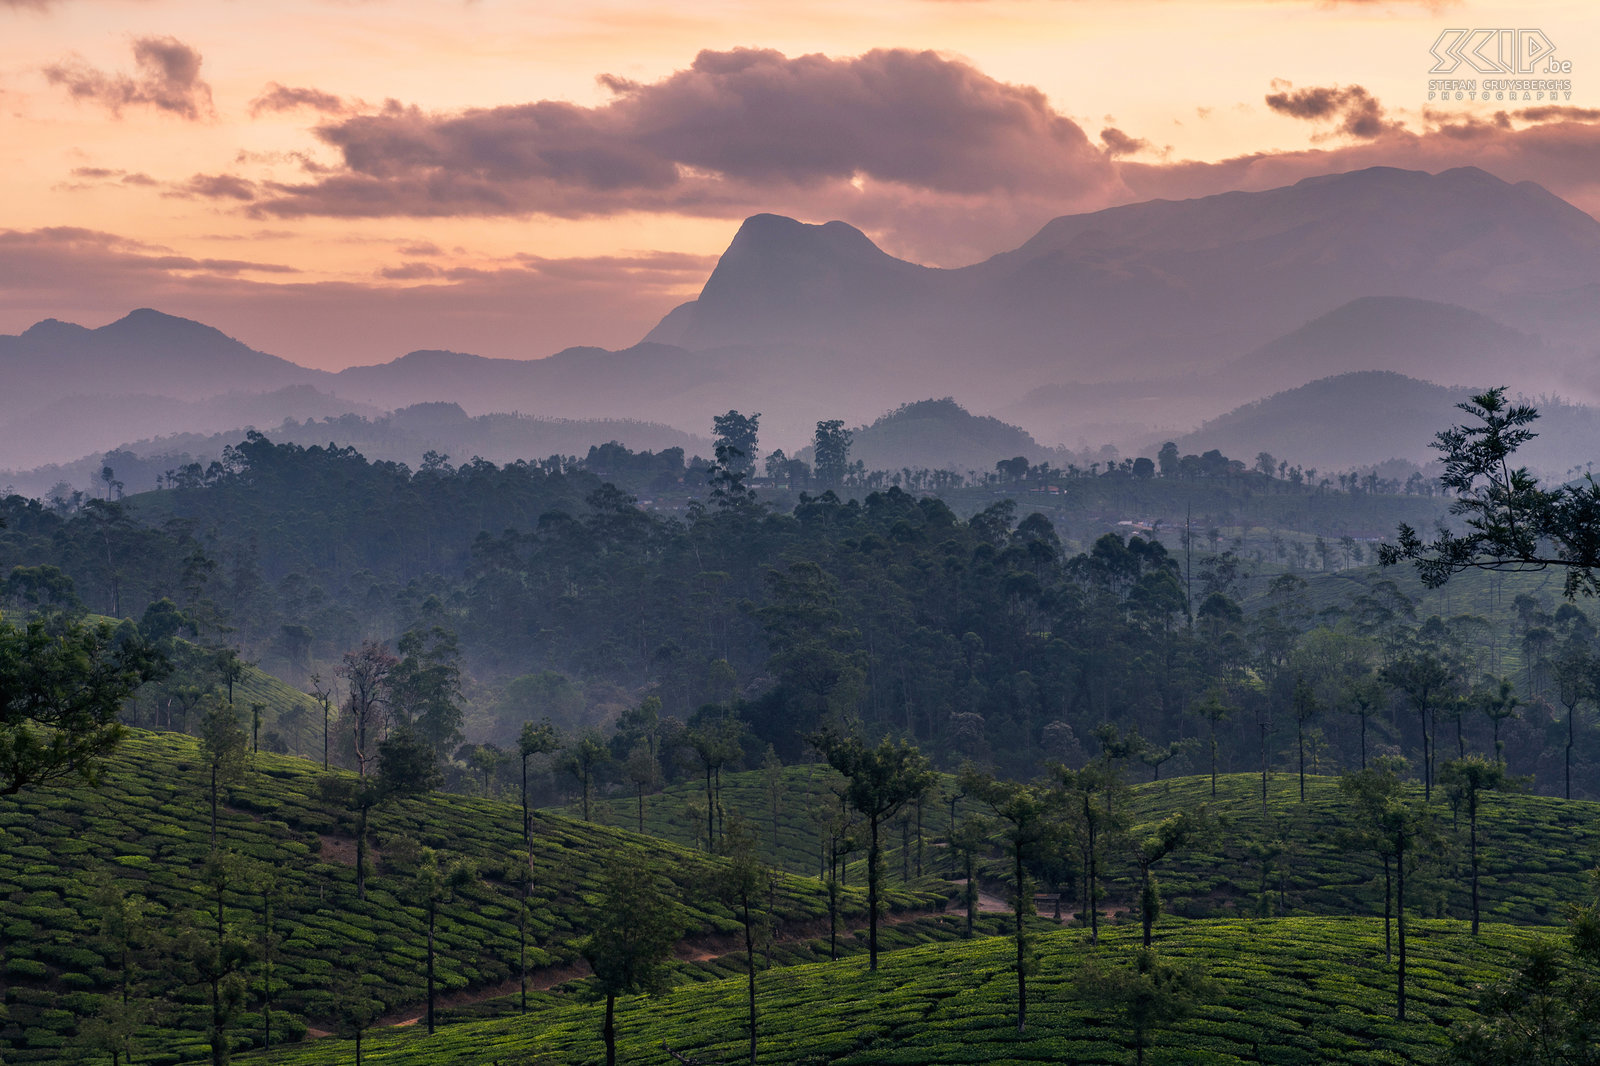 Valparai - Sunrise tea fields Sunrise between the tea fields in Valparai, one of the most beautiful hill stations. Valparai It is located 1100m above sea level on the Anaimalai Hills range of the Western Ghats in the state Tamil Nadu in south India Stefan Cruysberghs